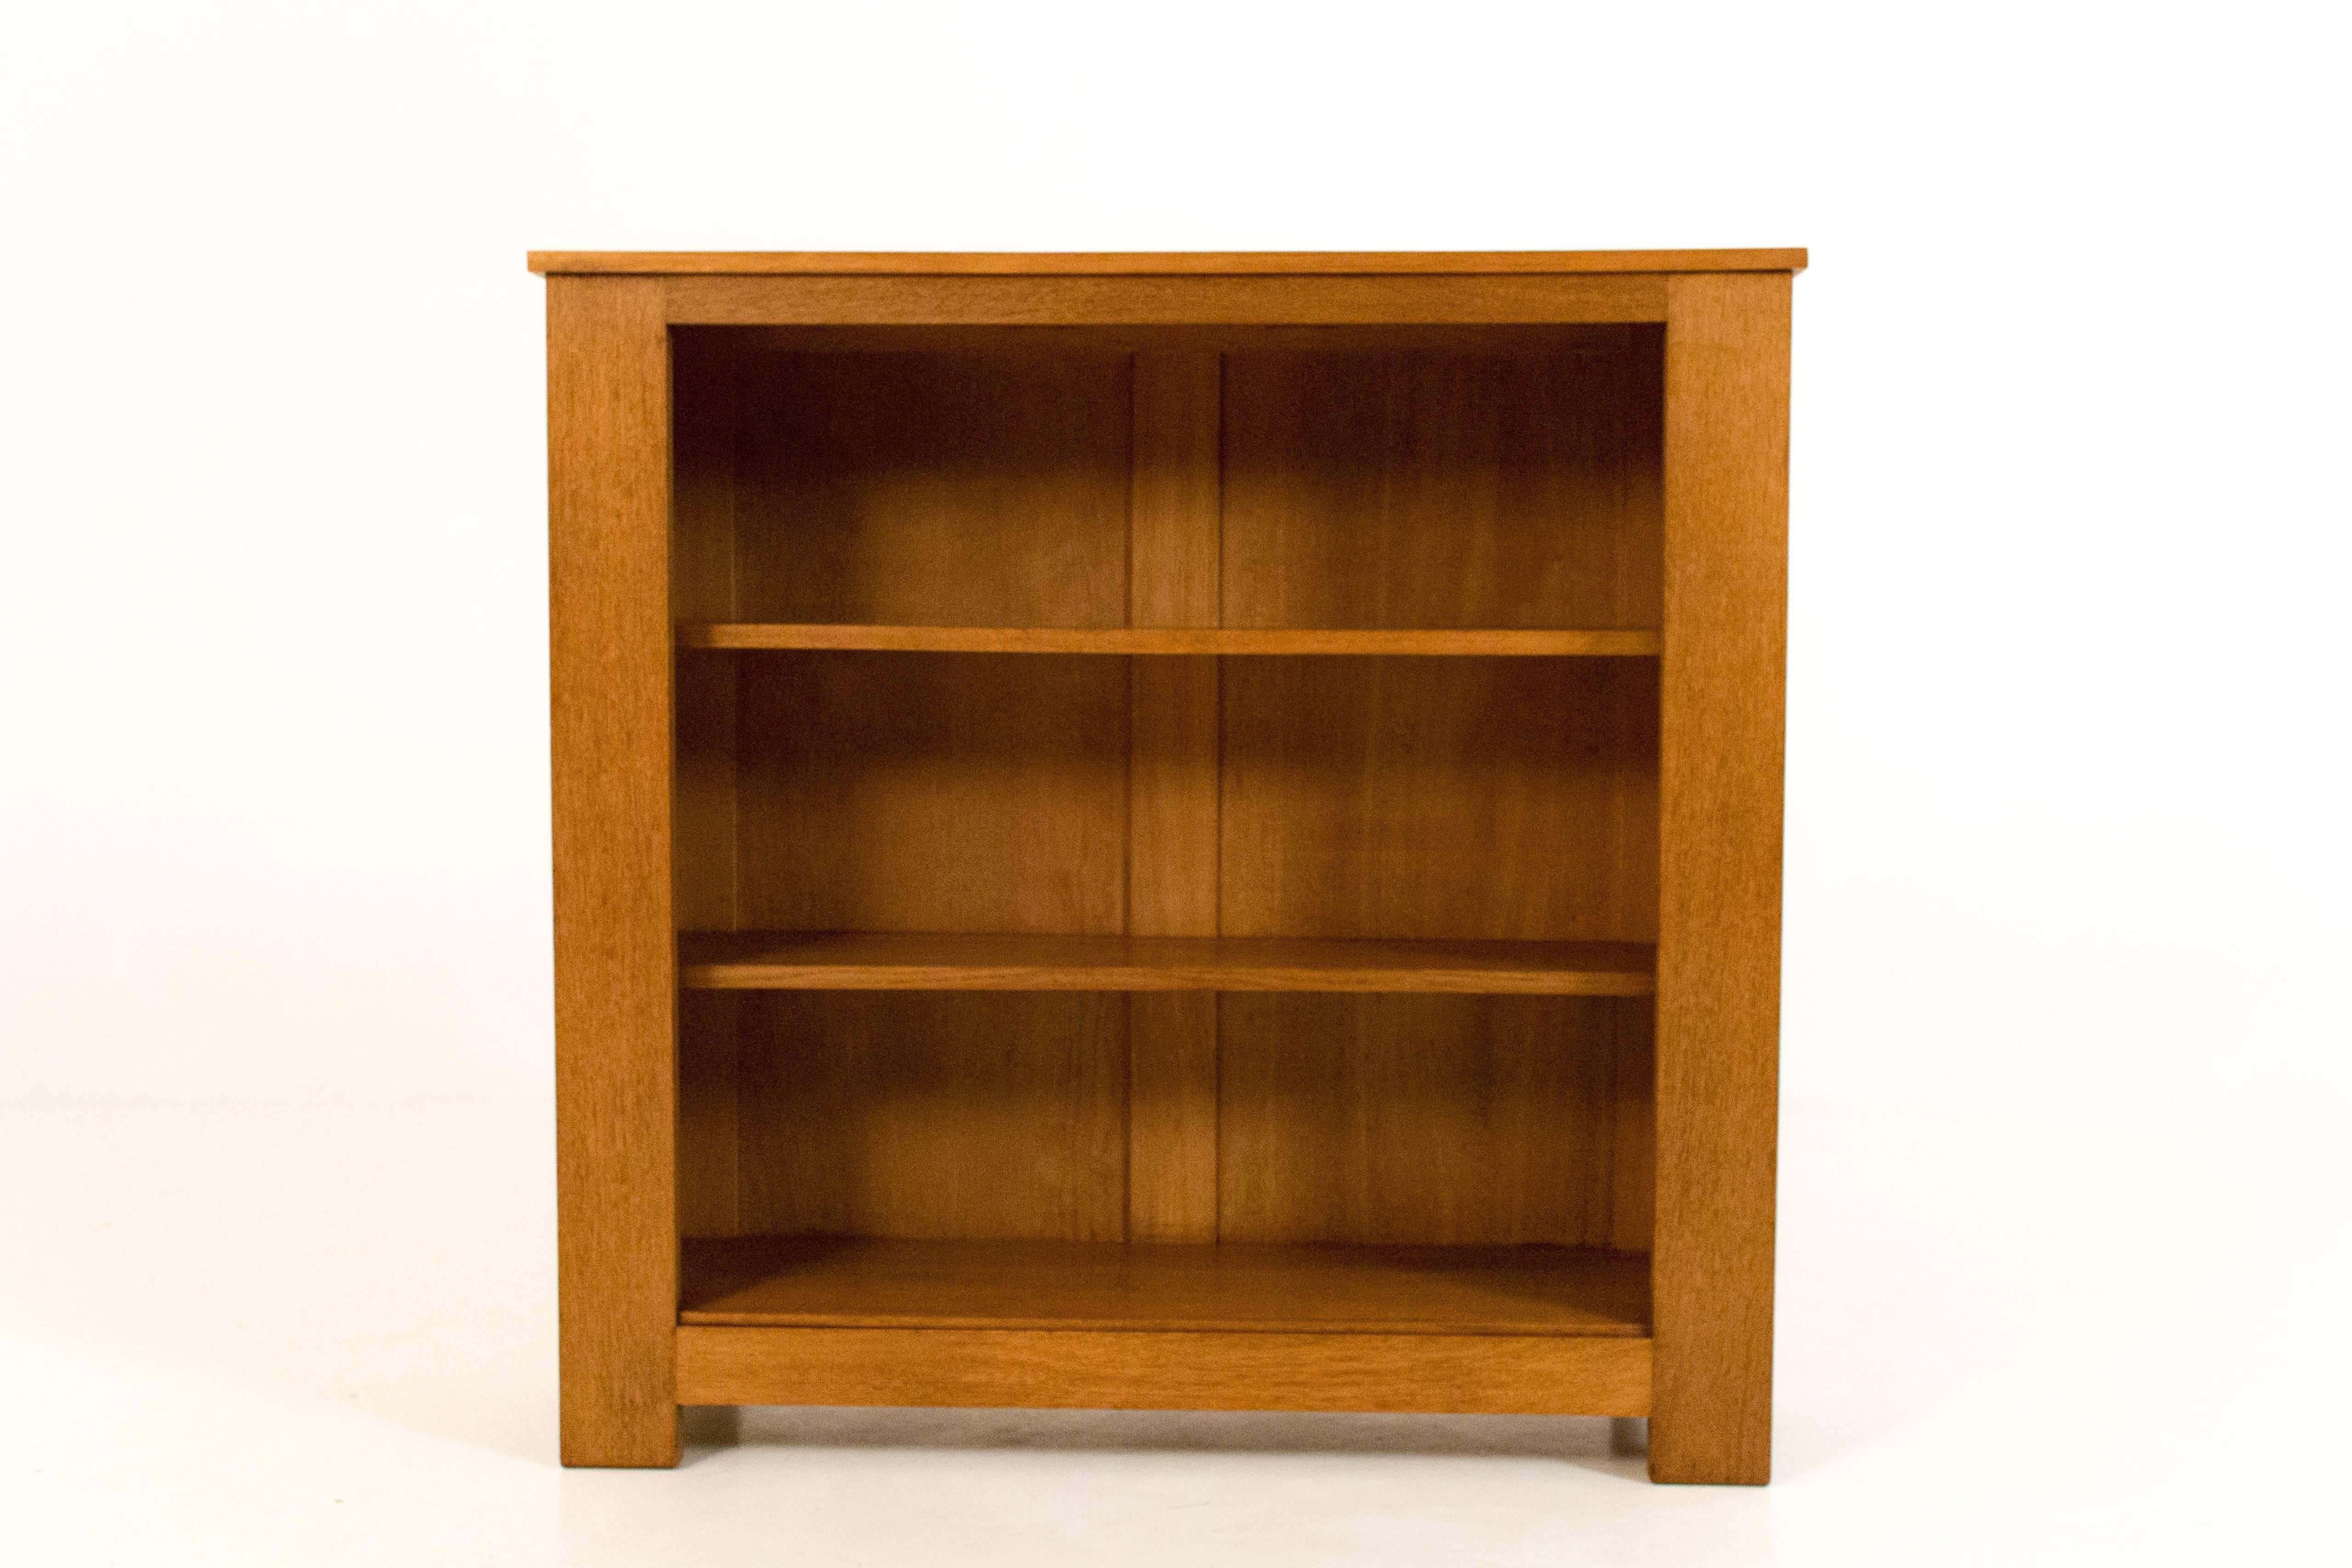 Stylish Art Deco Haagse School open bookcase by H.Wouda for Pander, 1920s.
Solid oak with two original adjustable oak shelves.
Marked with metal tag Pander and brand marked.
In very good condition with minor wear consistent with age and